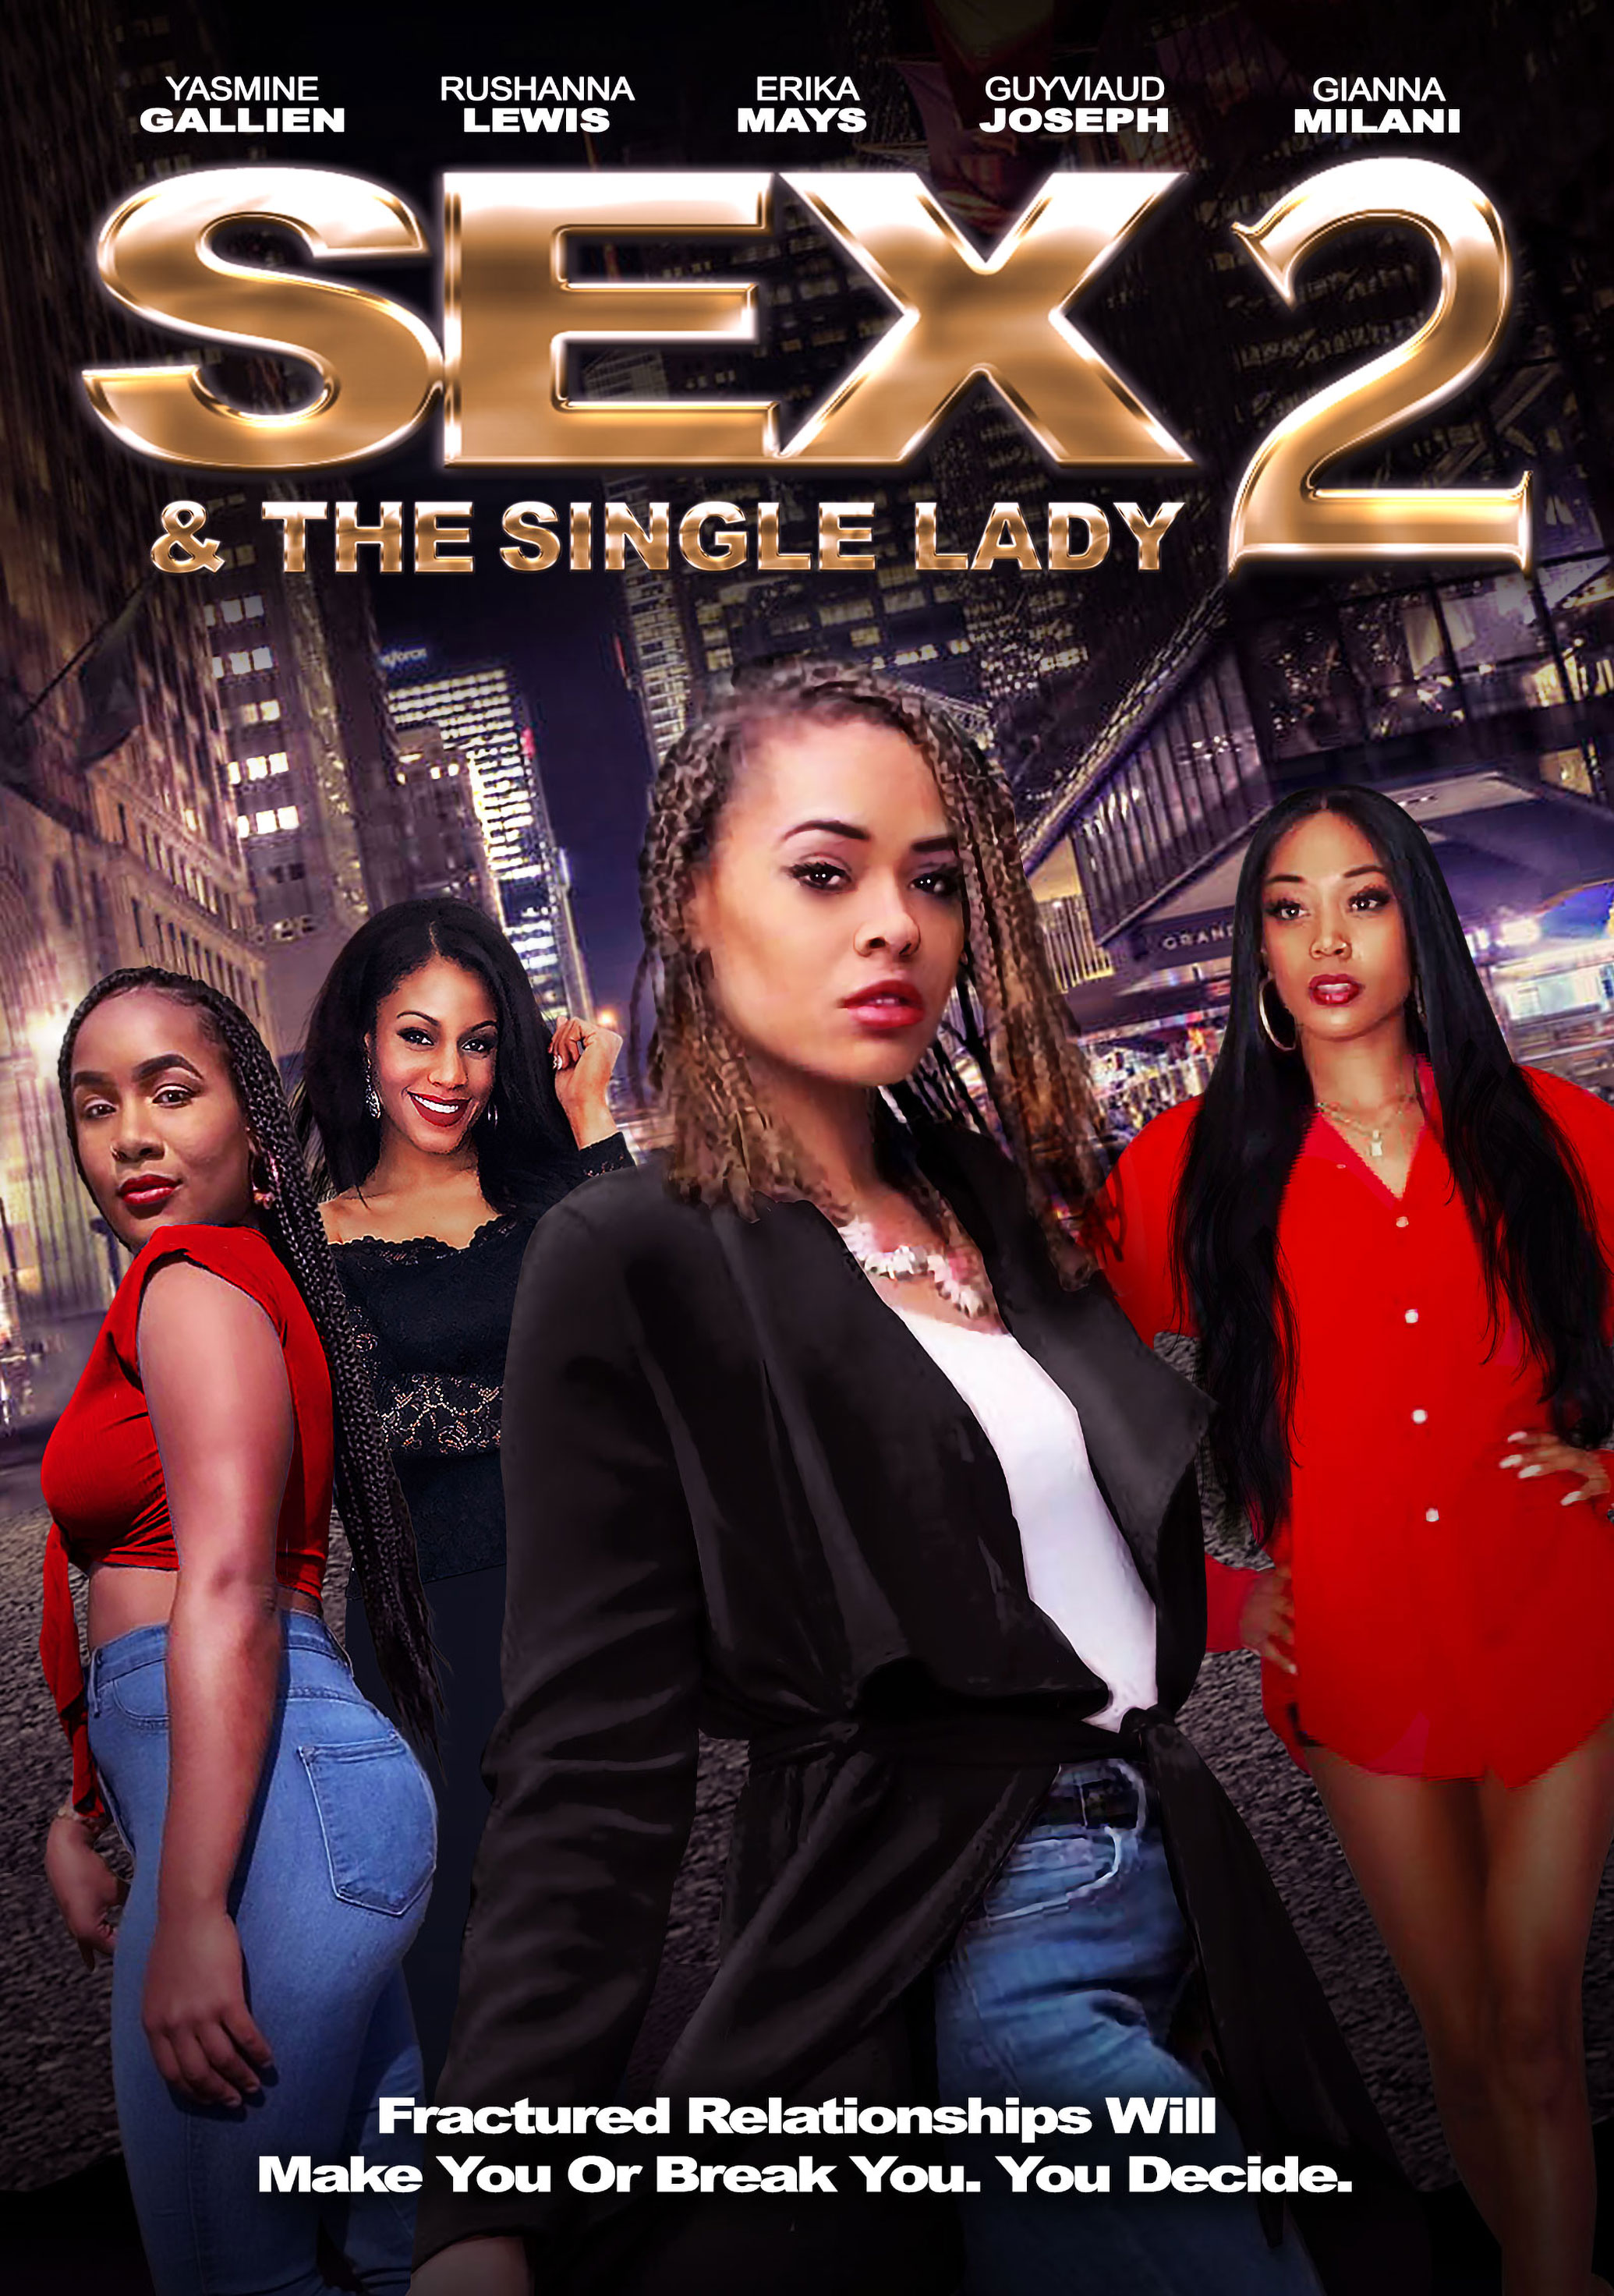 Isabella Stone Sexy Xnxx - Sex and the Single Lady 2 (2018) Drama, Directed By Teri Denine|Pamela  Patino